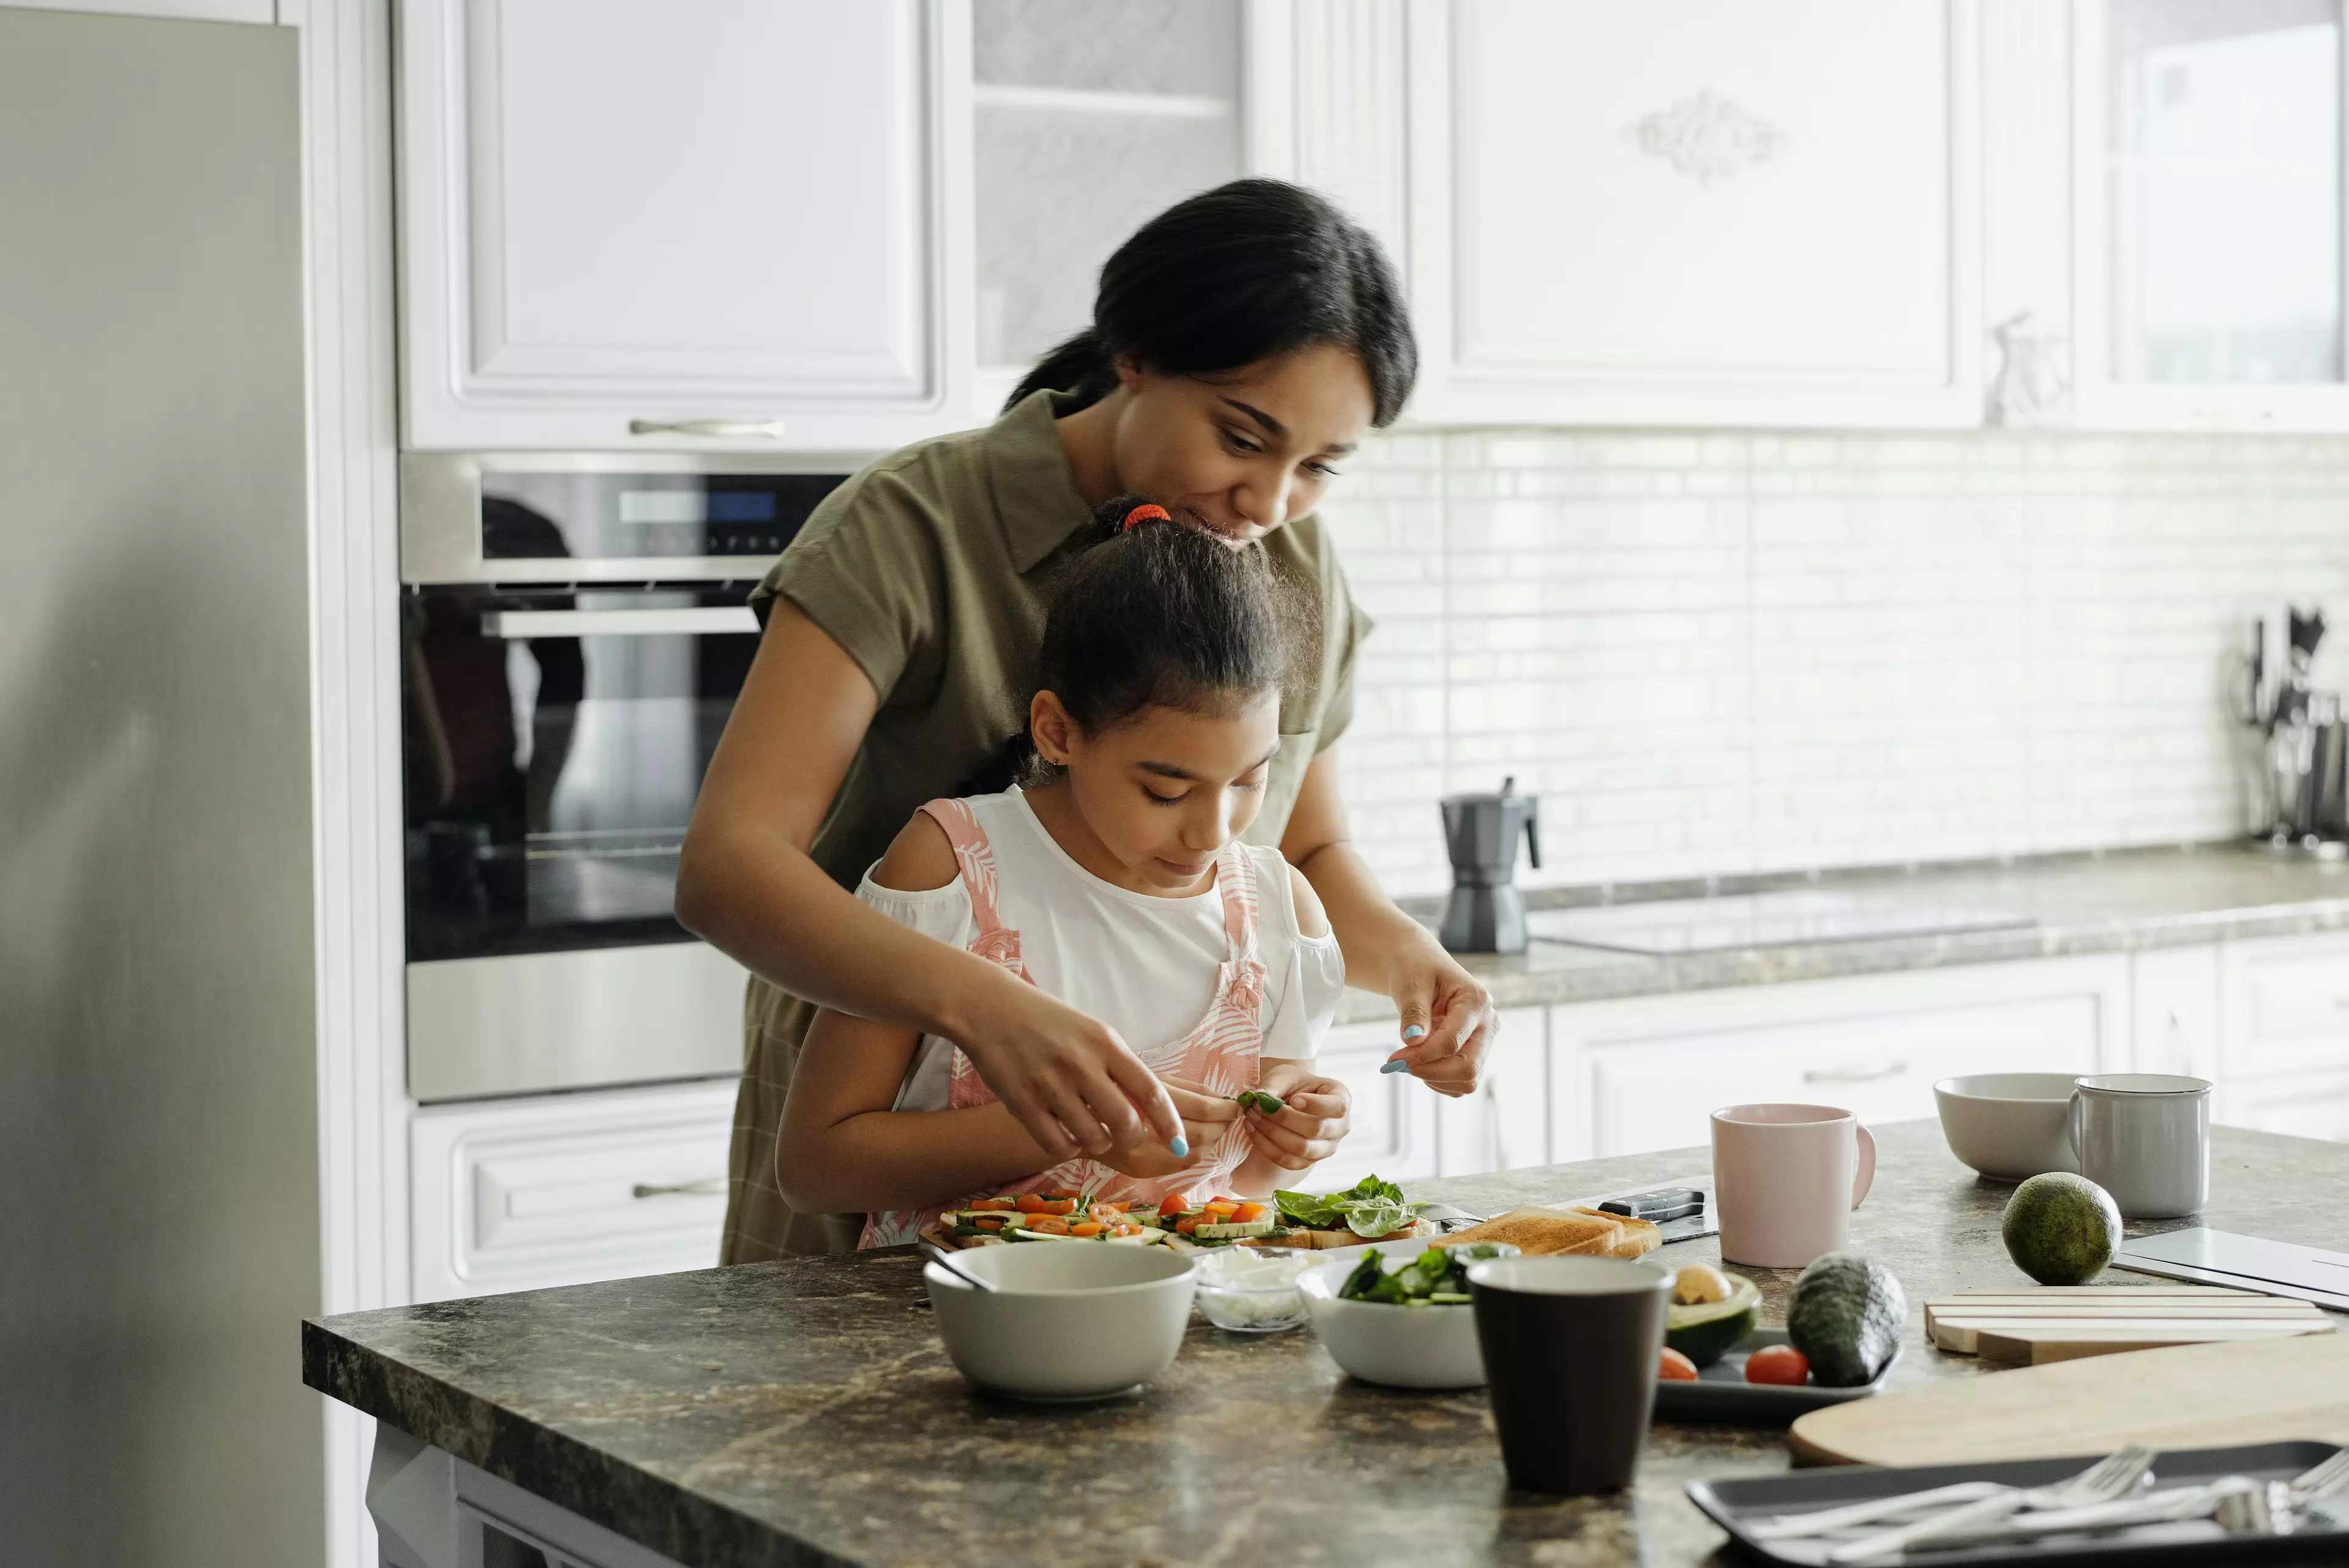 Being in charge of the household could be good for your health (